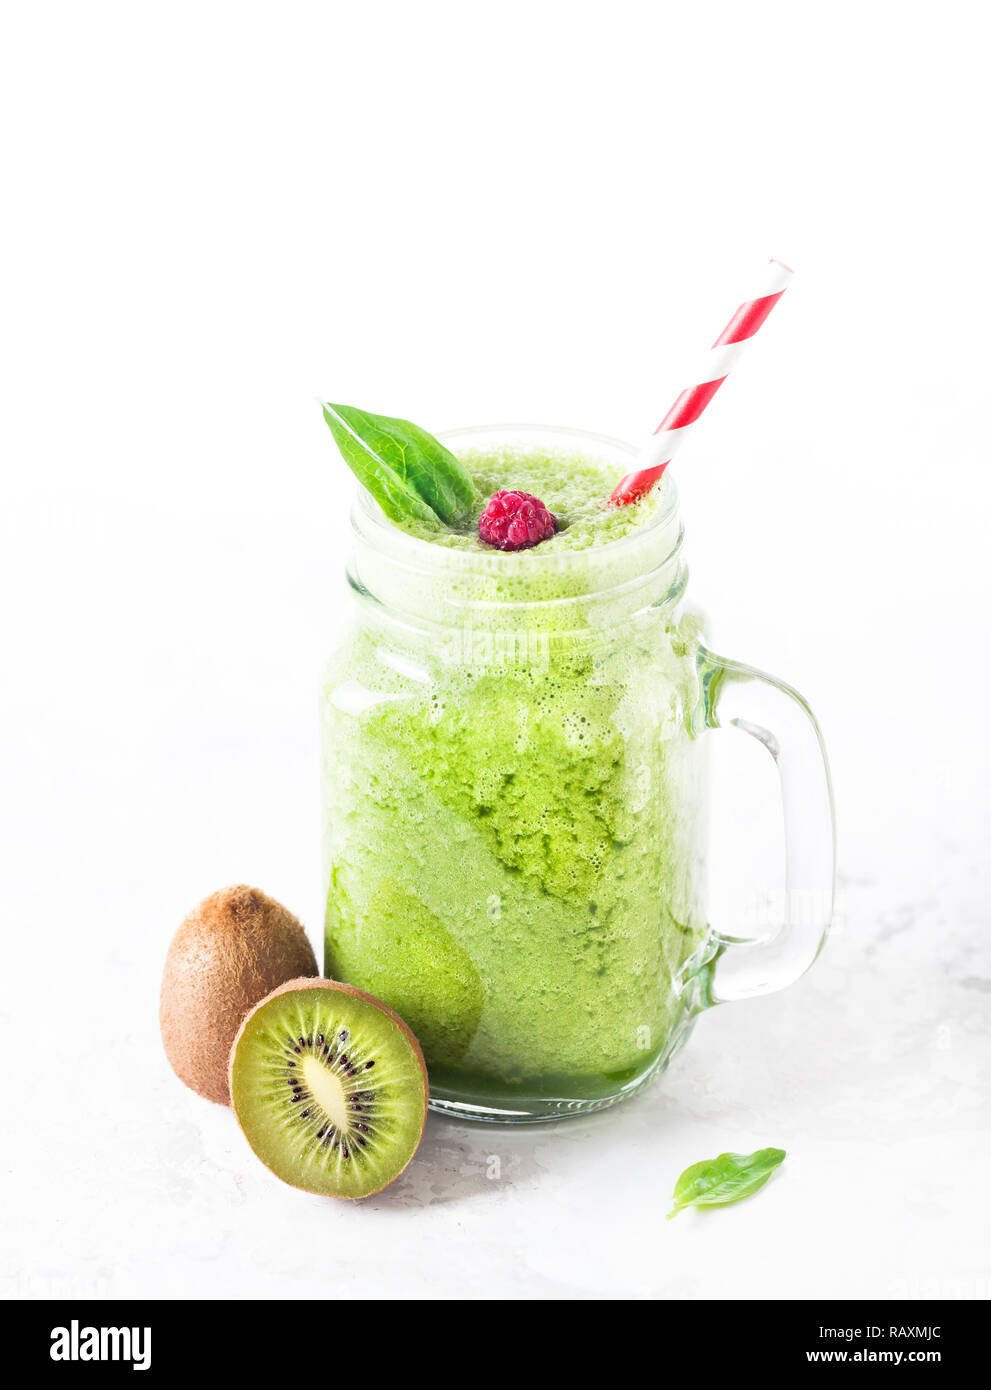 Green smoothie with kiwi, green apple and spinach, decorated by berry on white background Stock Photo